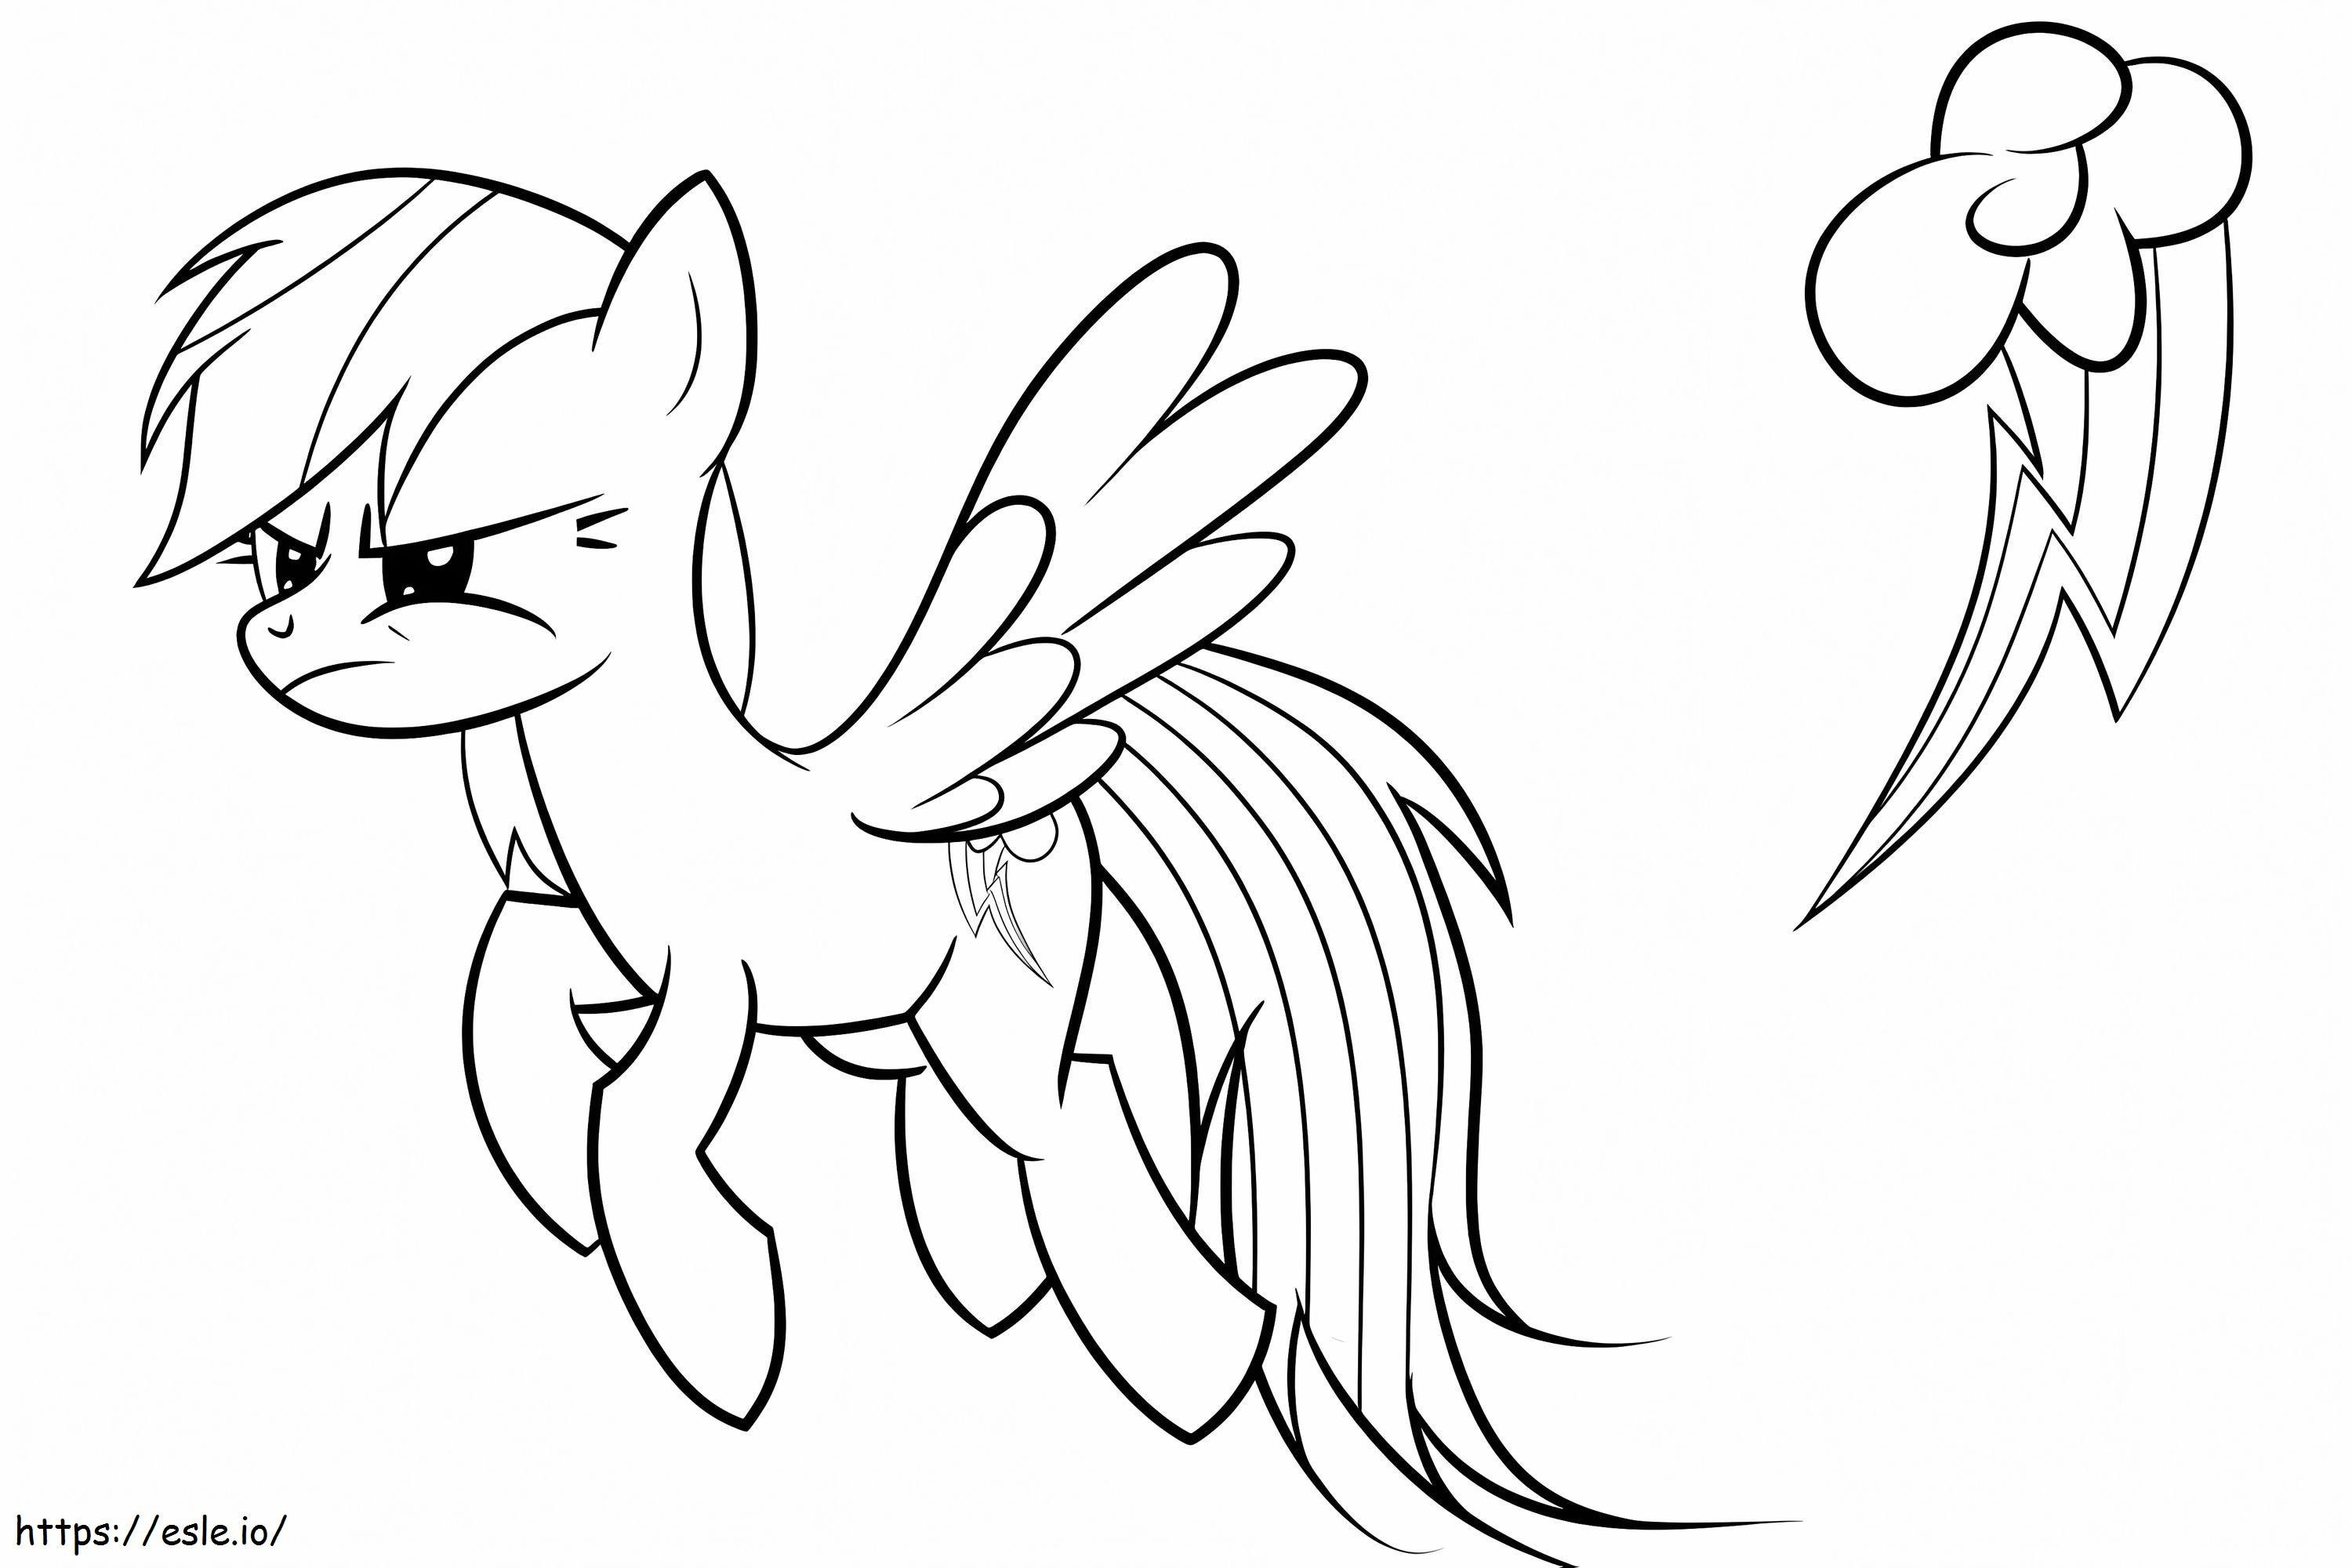 Angry Rainbow Dash coloring page